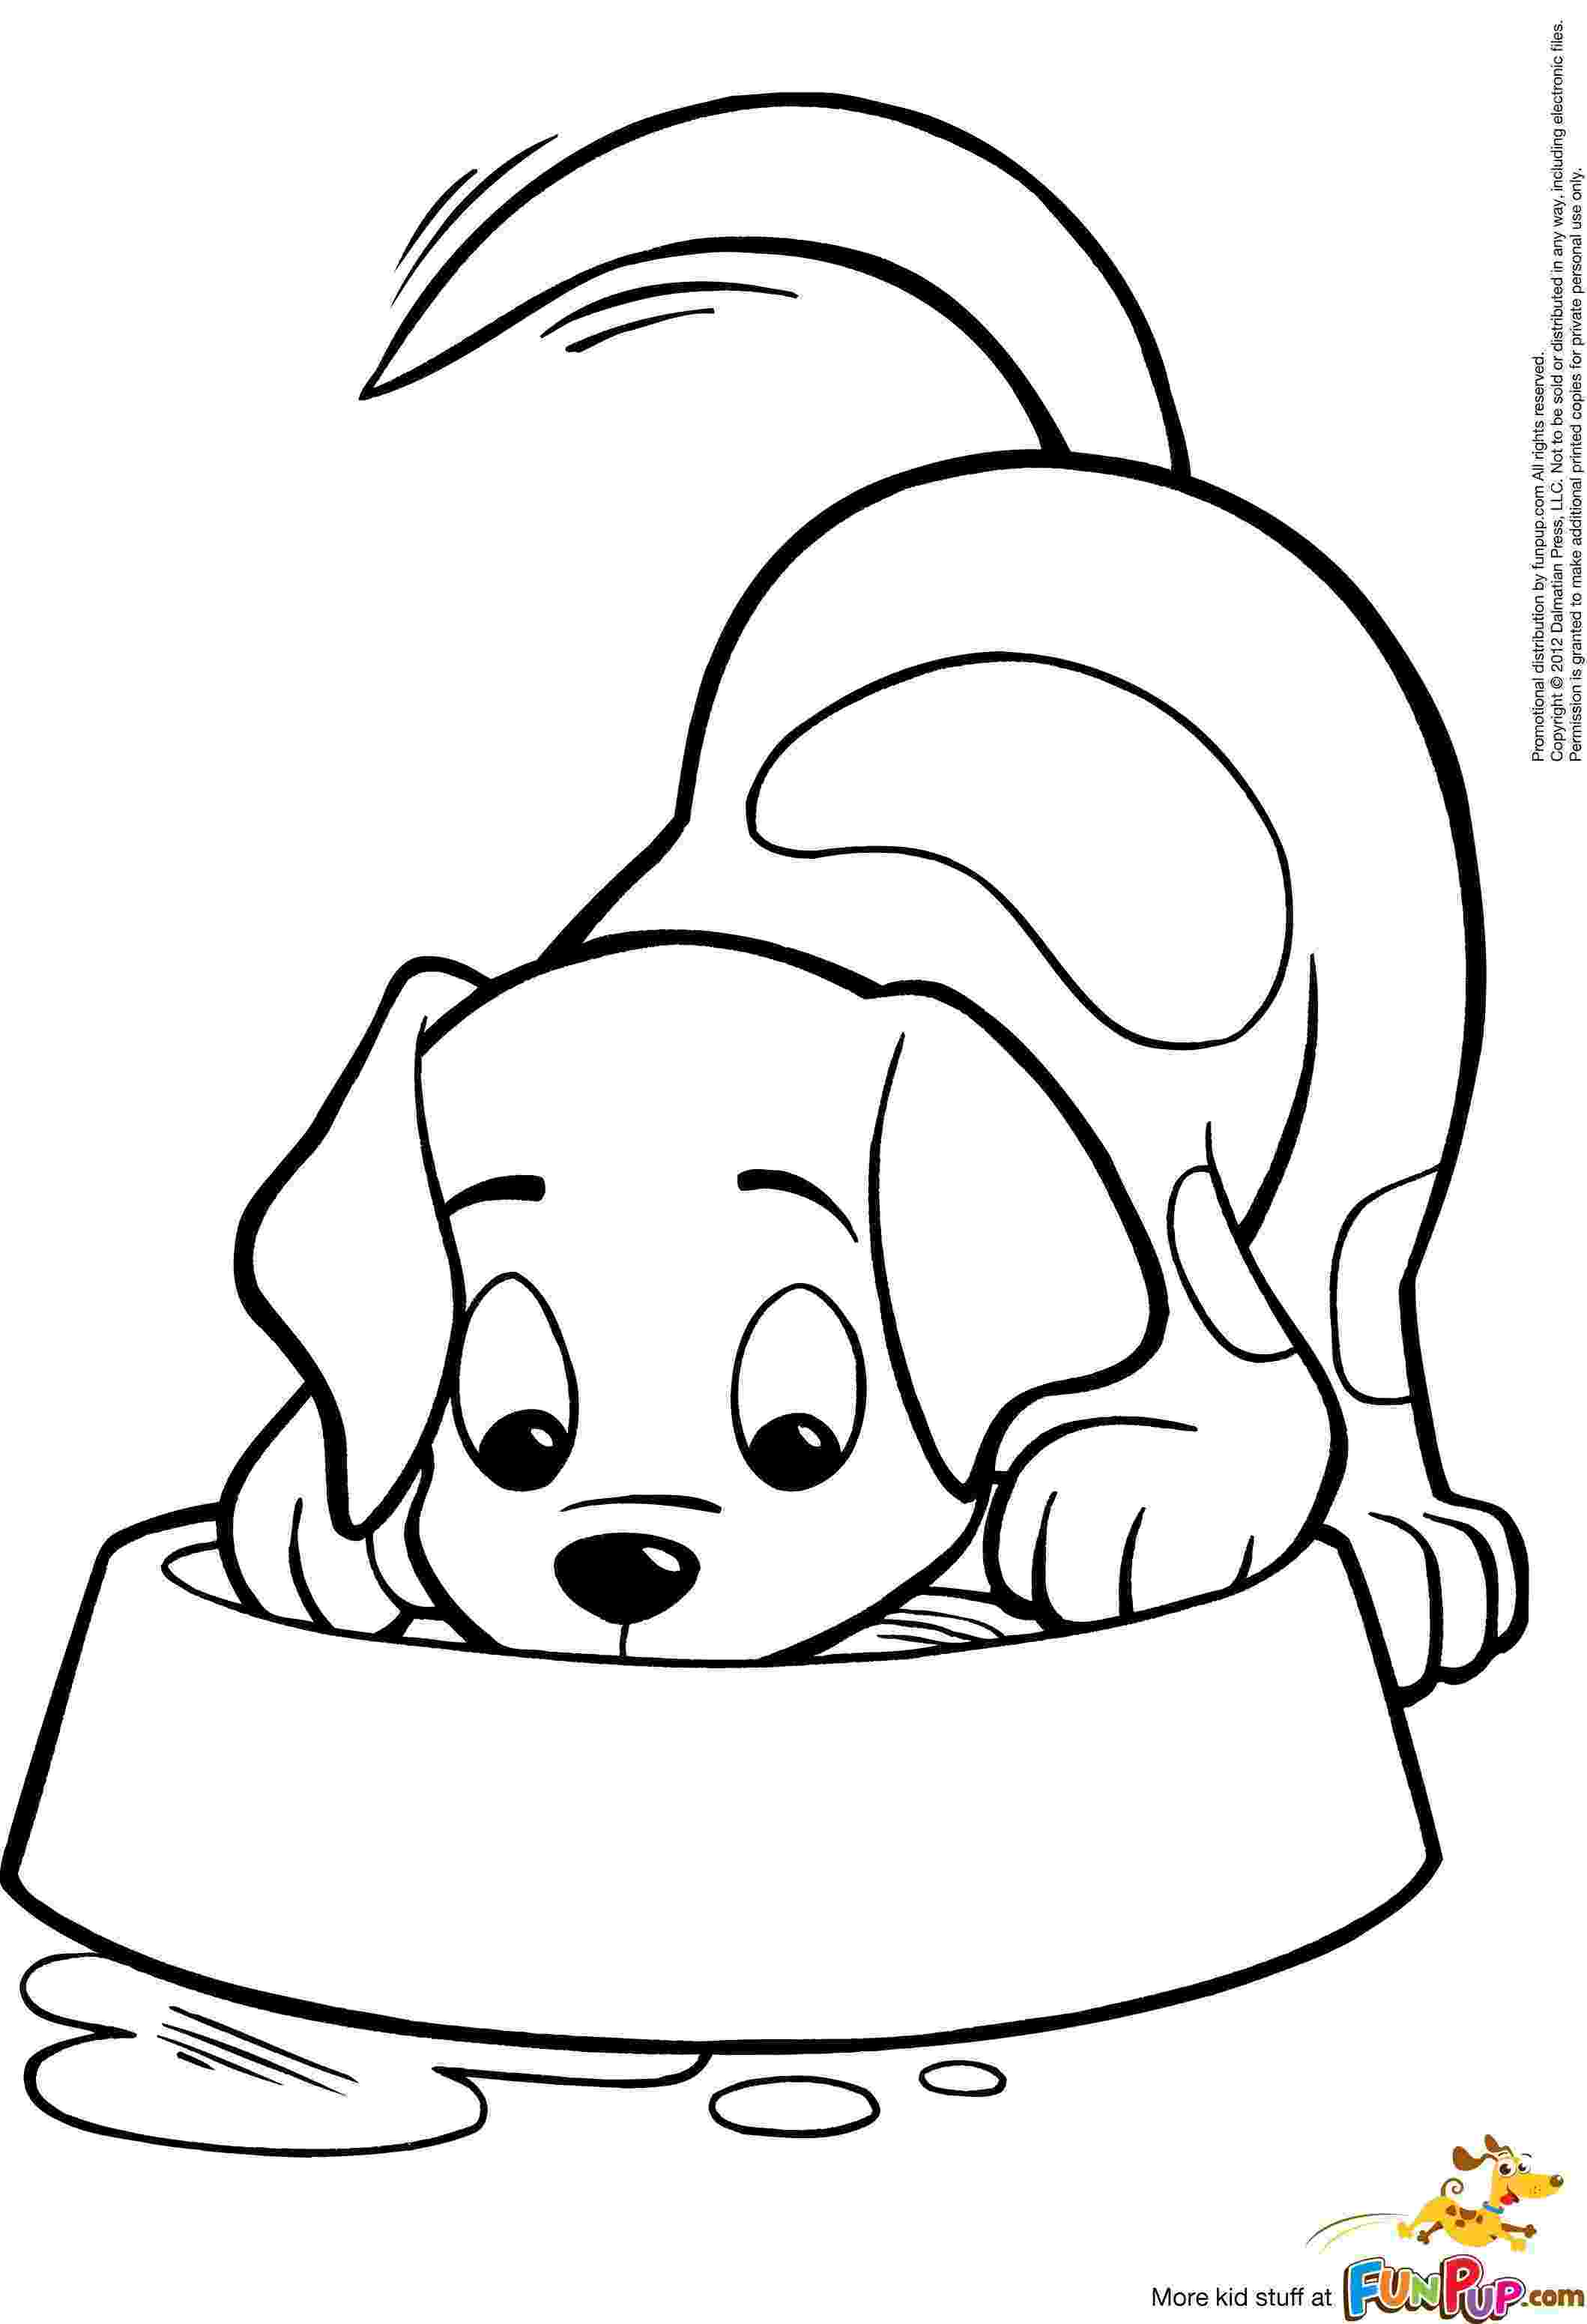 coloring pages of puppies dog coloring pages bing images dog patterns of puppies pages coloring 